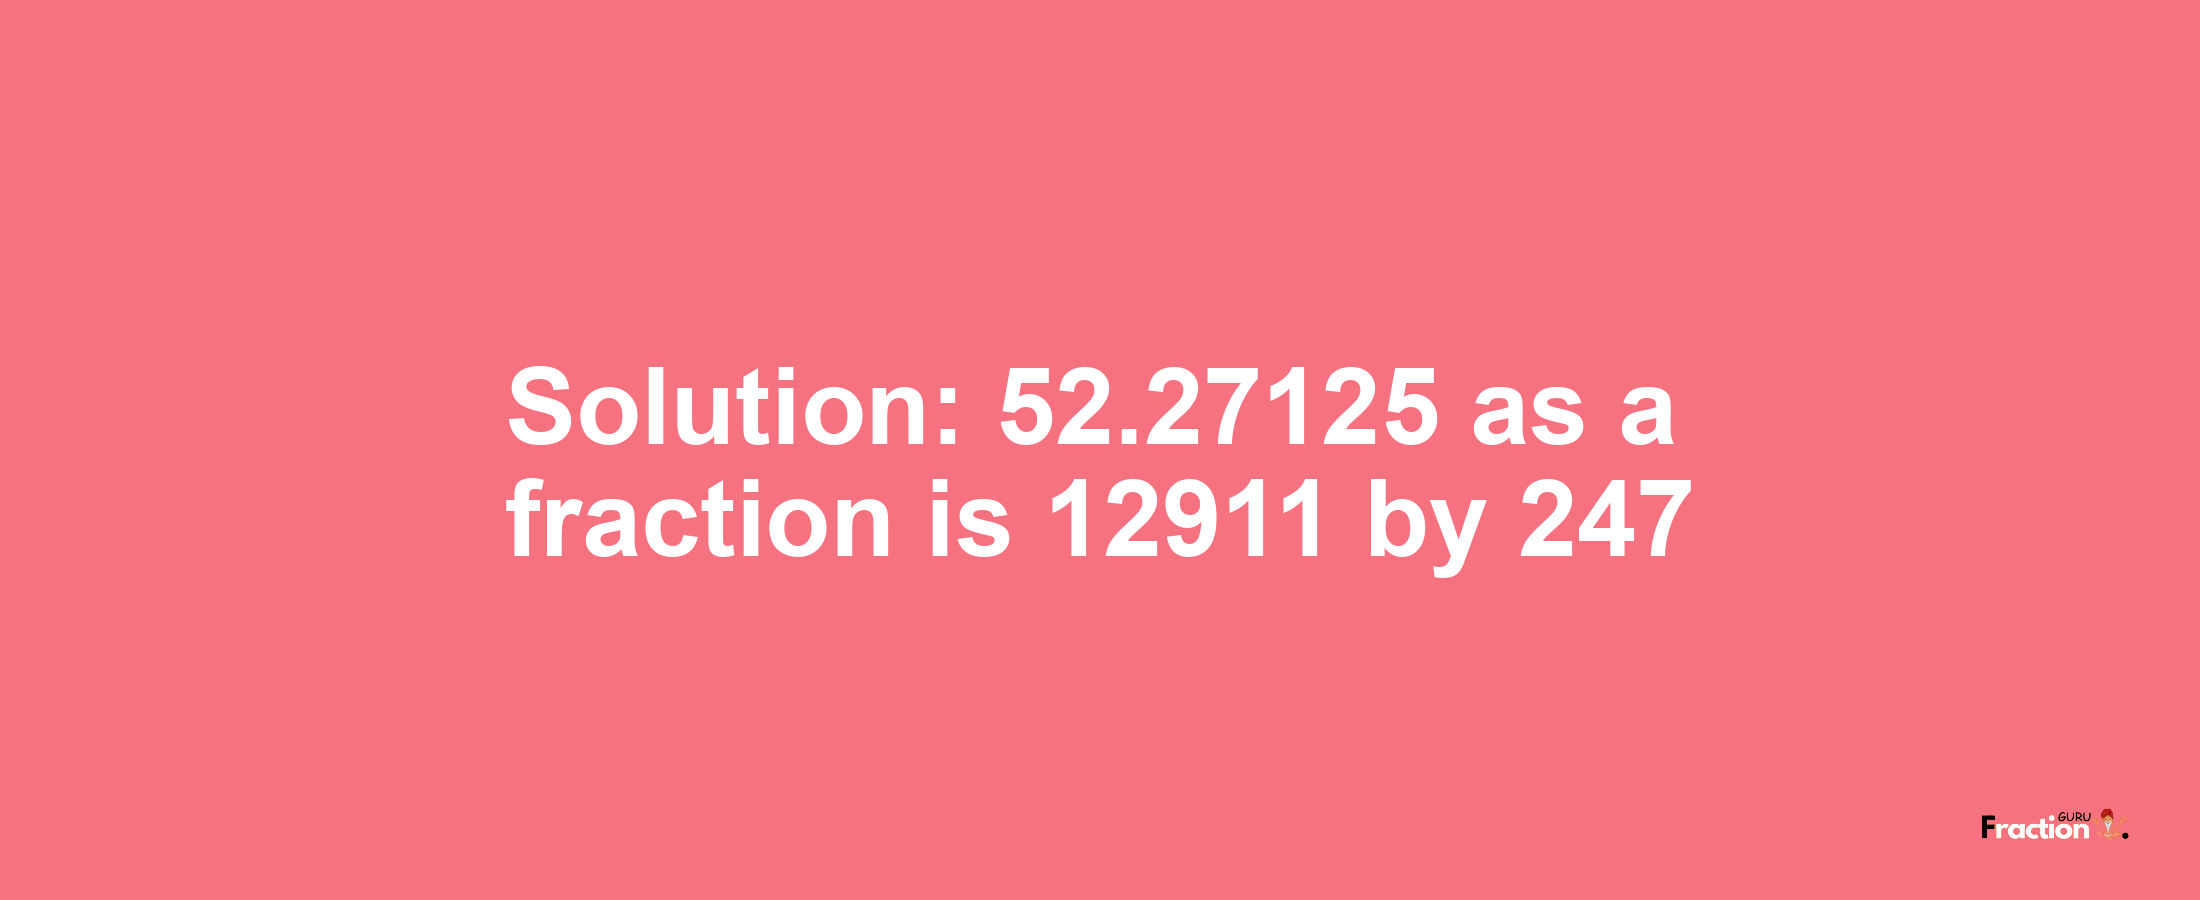 Solution:52.27125 as a fraction is 12911/247